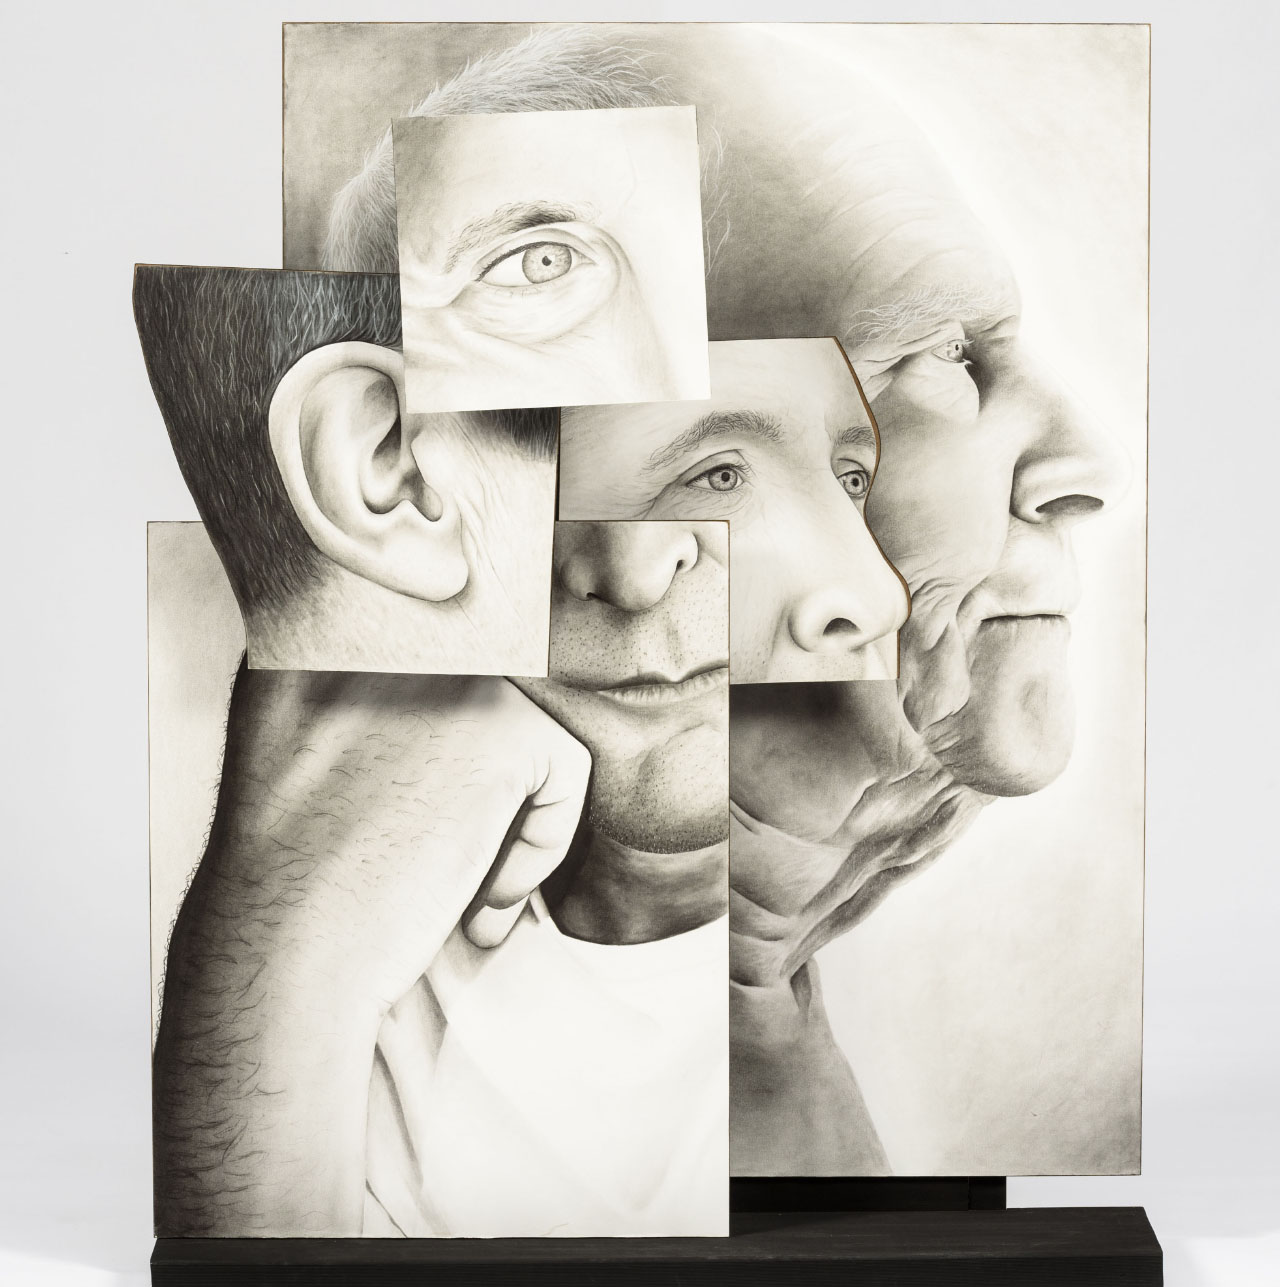 multiple panels of portait detailing, an eye, ear, nose, hand and profile, illustrated in black and white overlapping one another, standing on black base.